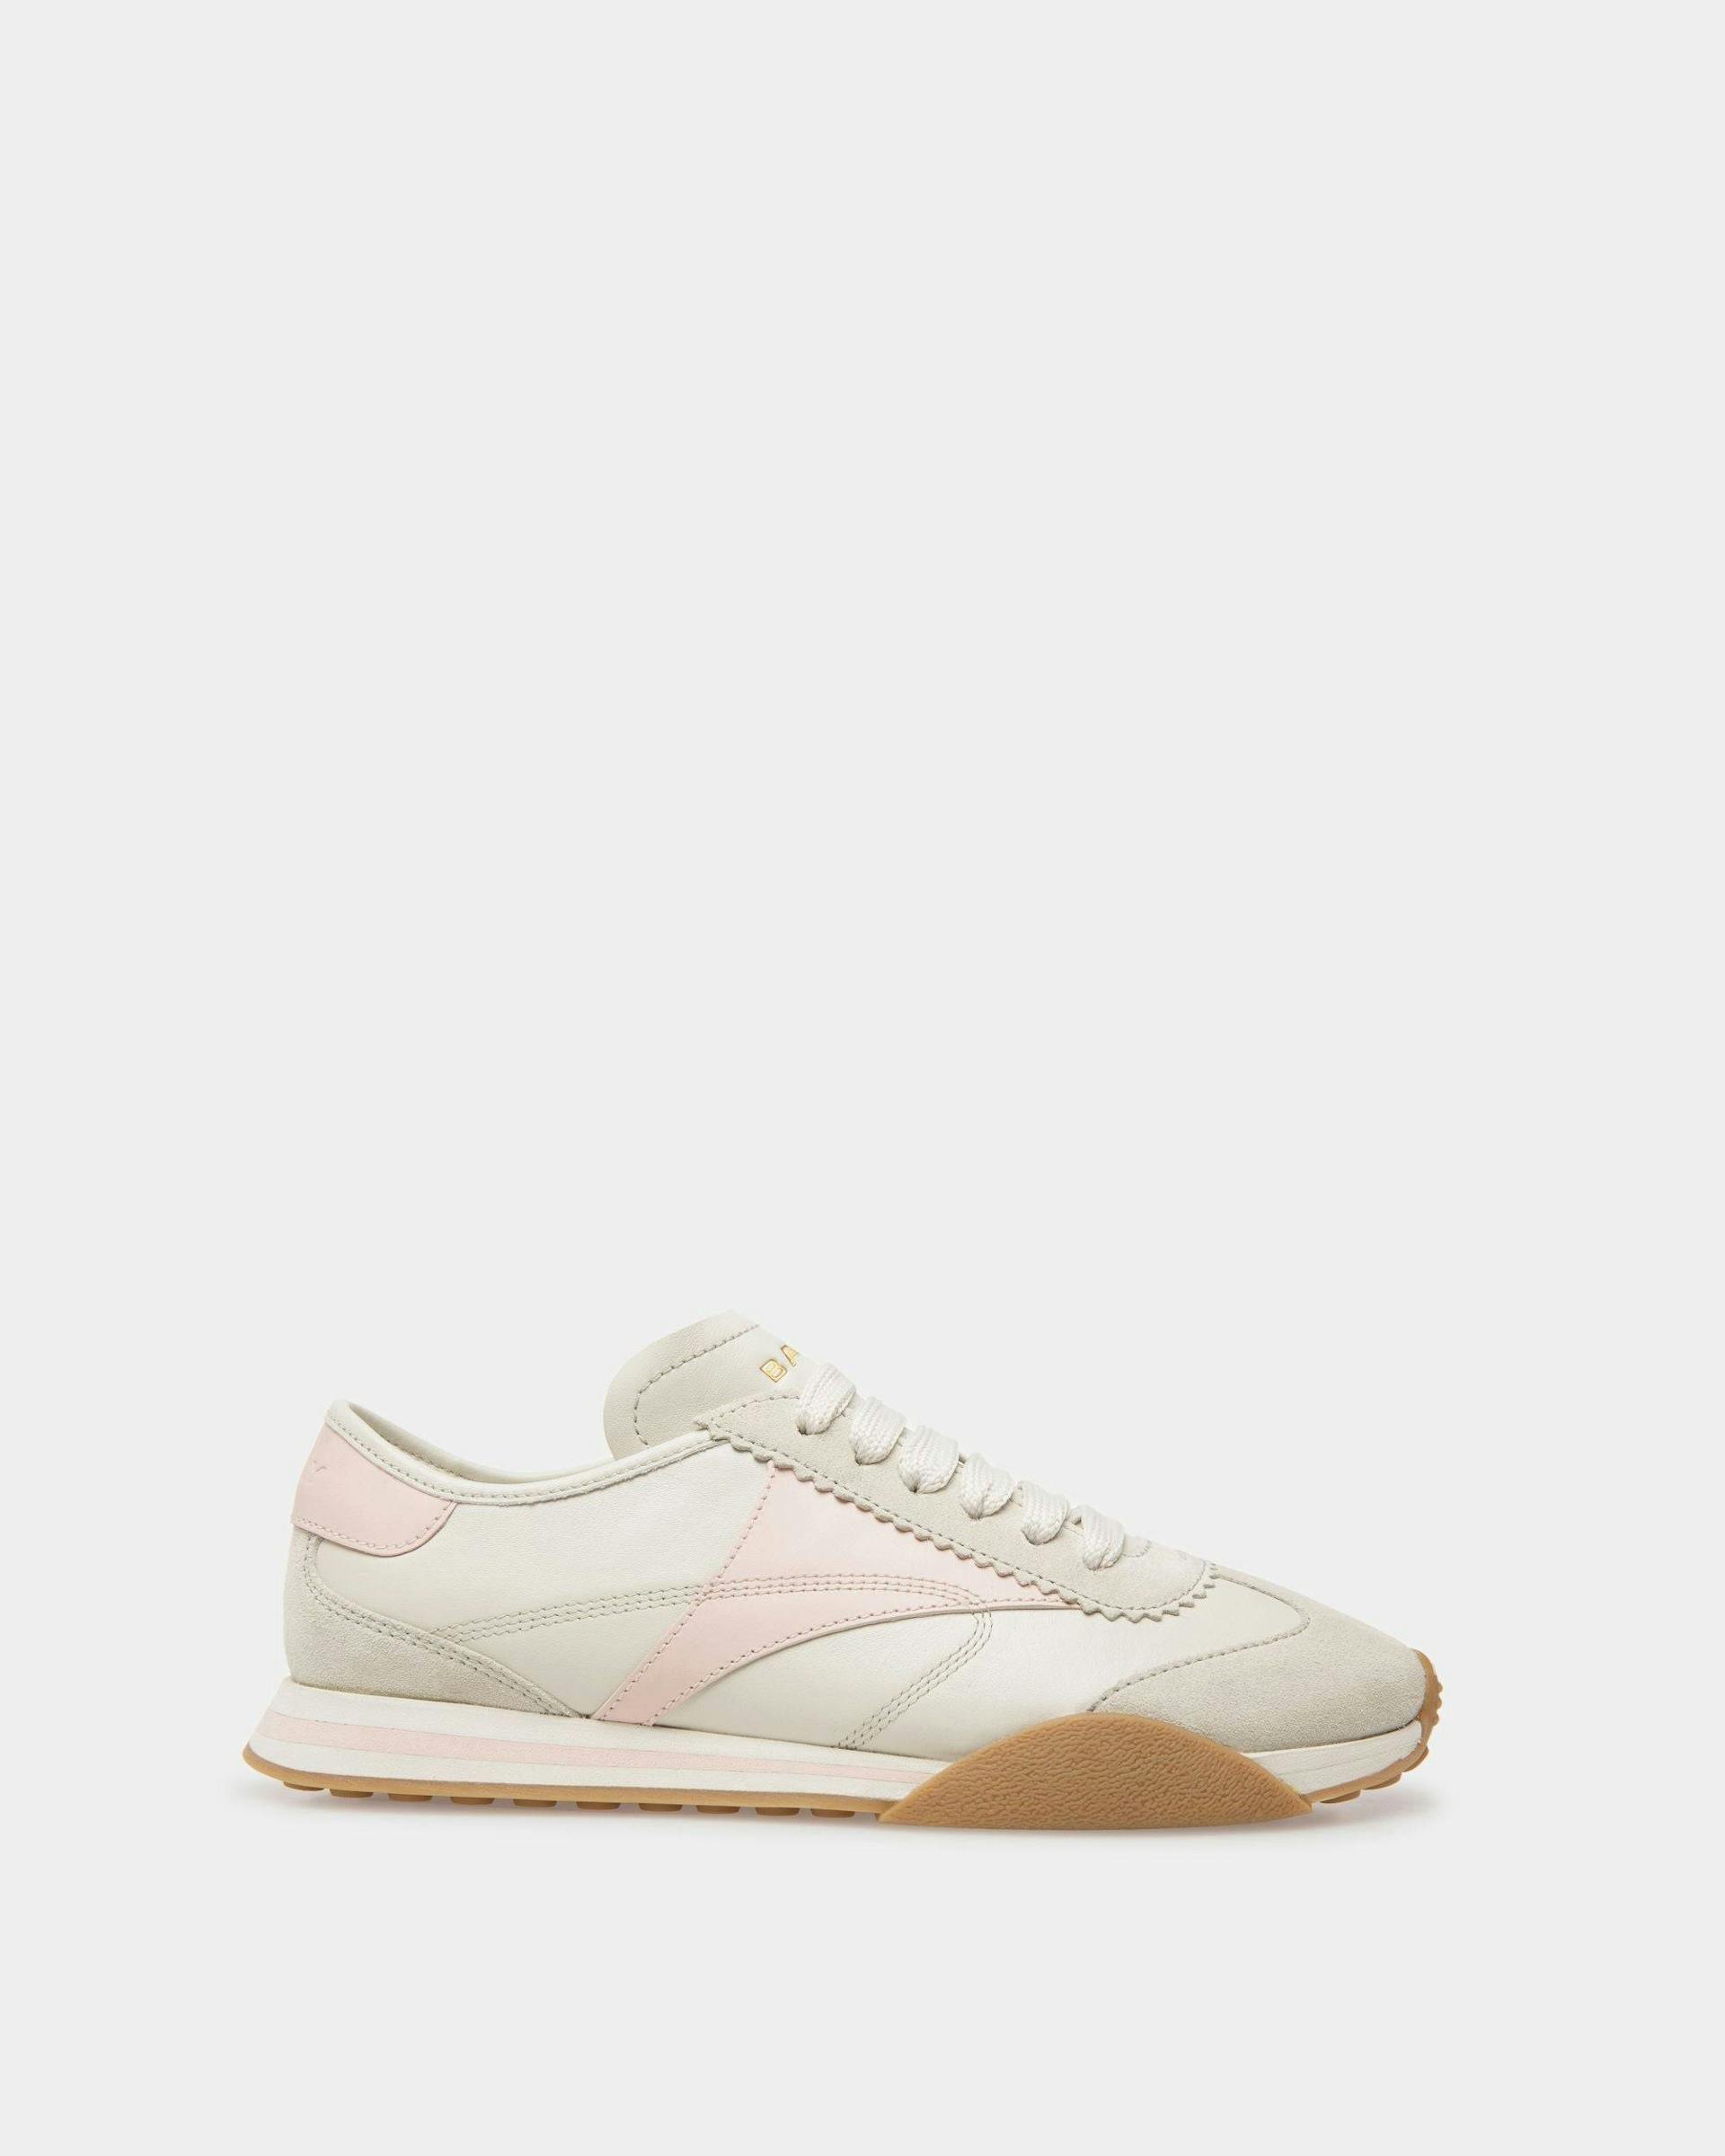 Sussex Sneakers In Dusty White And Rose Leather - Women's - Bally - 01